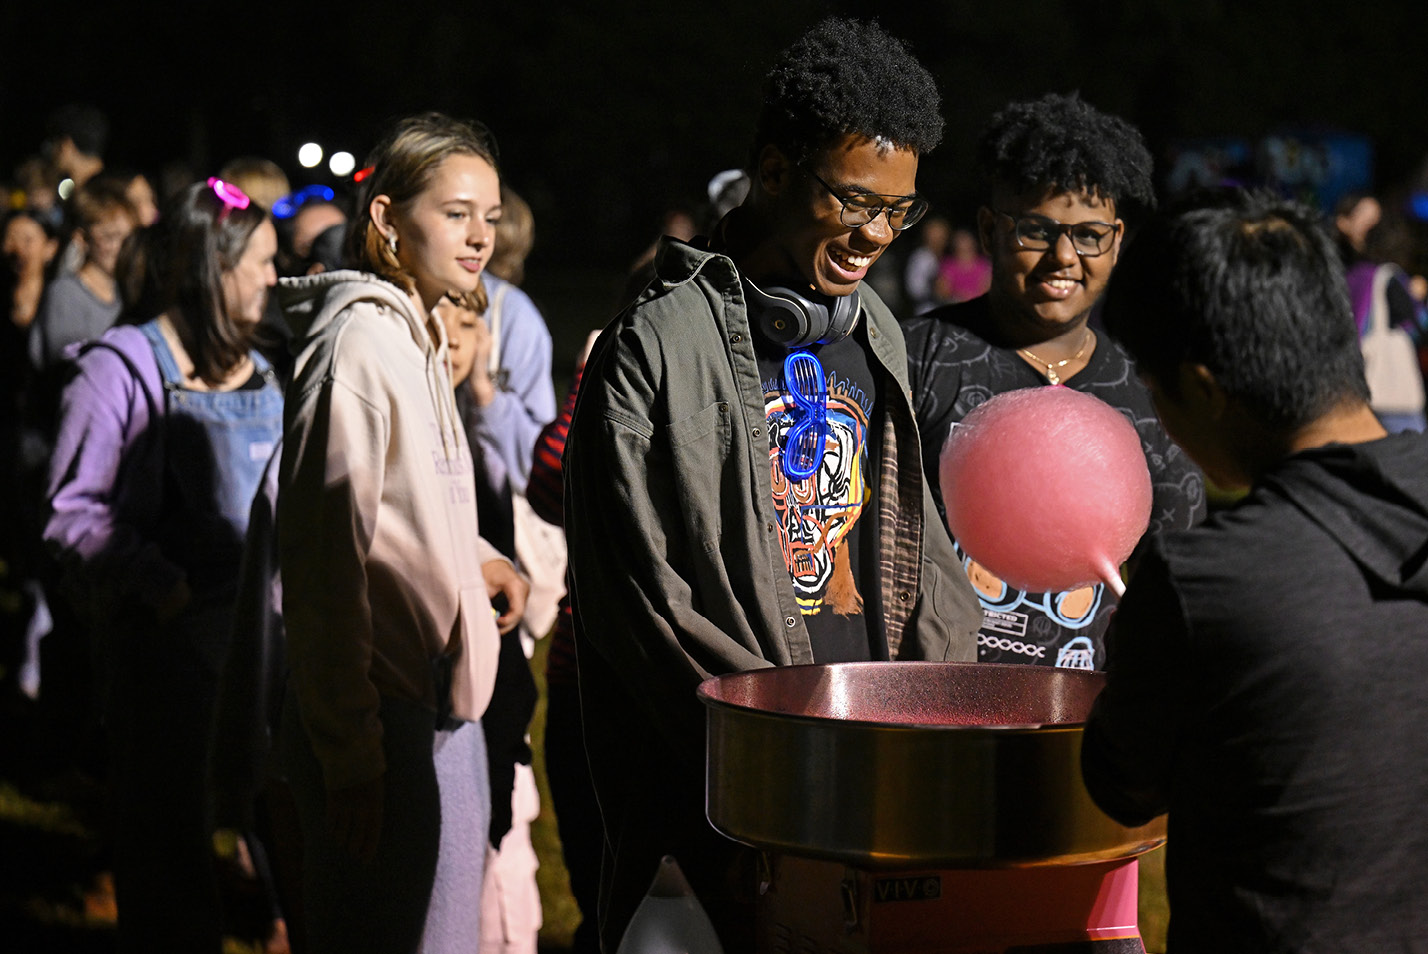 Students wait for cotton candy at the Fall carnival